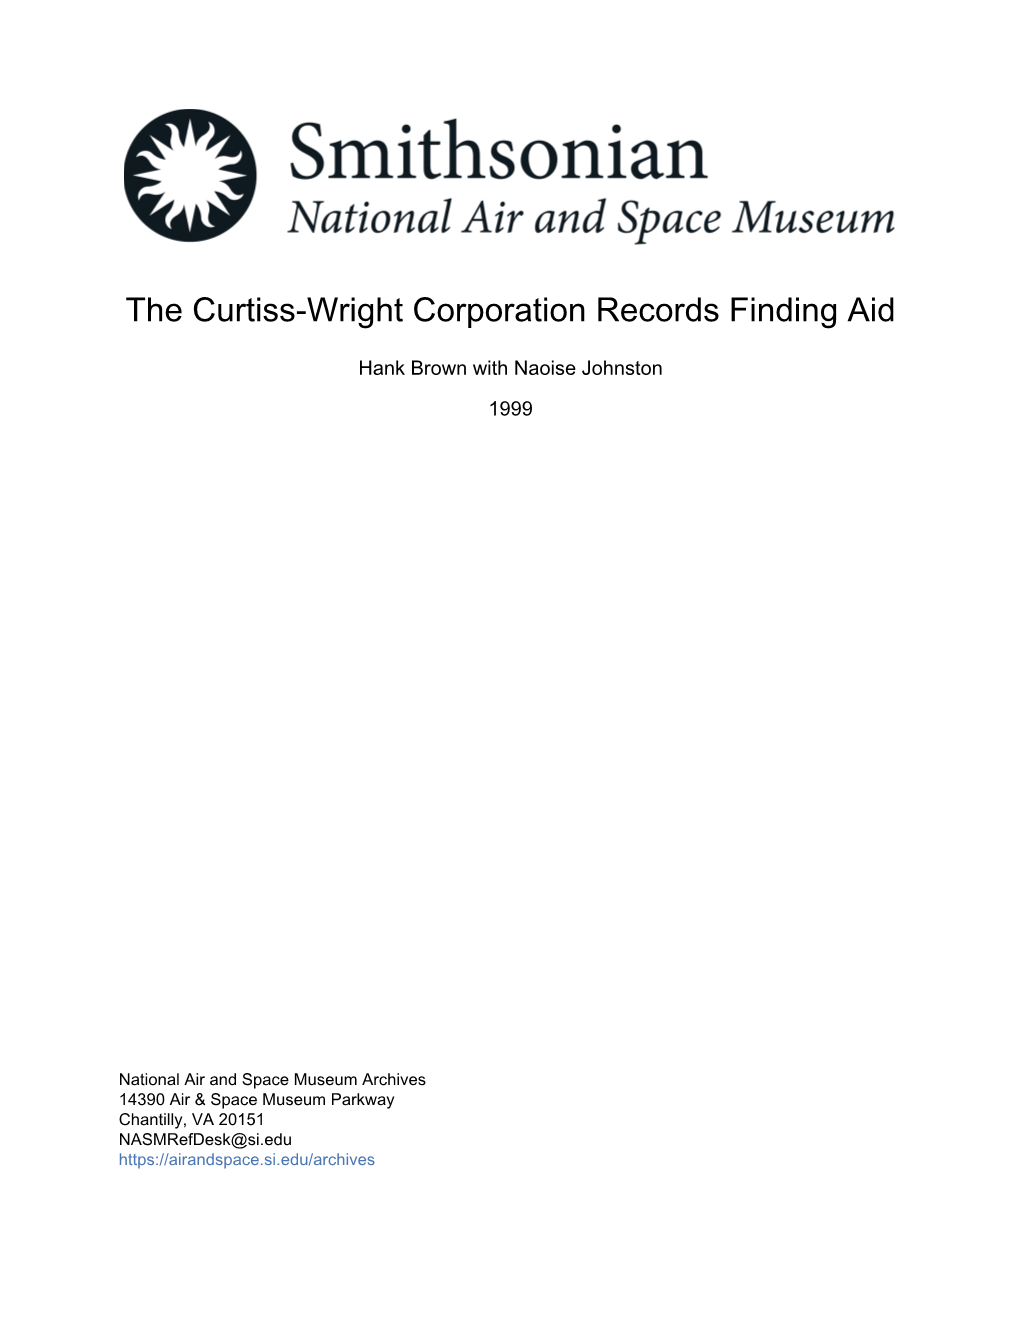 The Curtiss-Wright Corporation Records Finding Aid